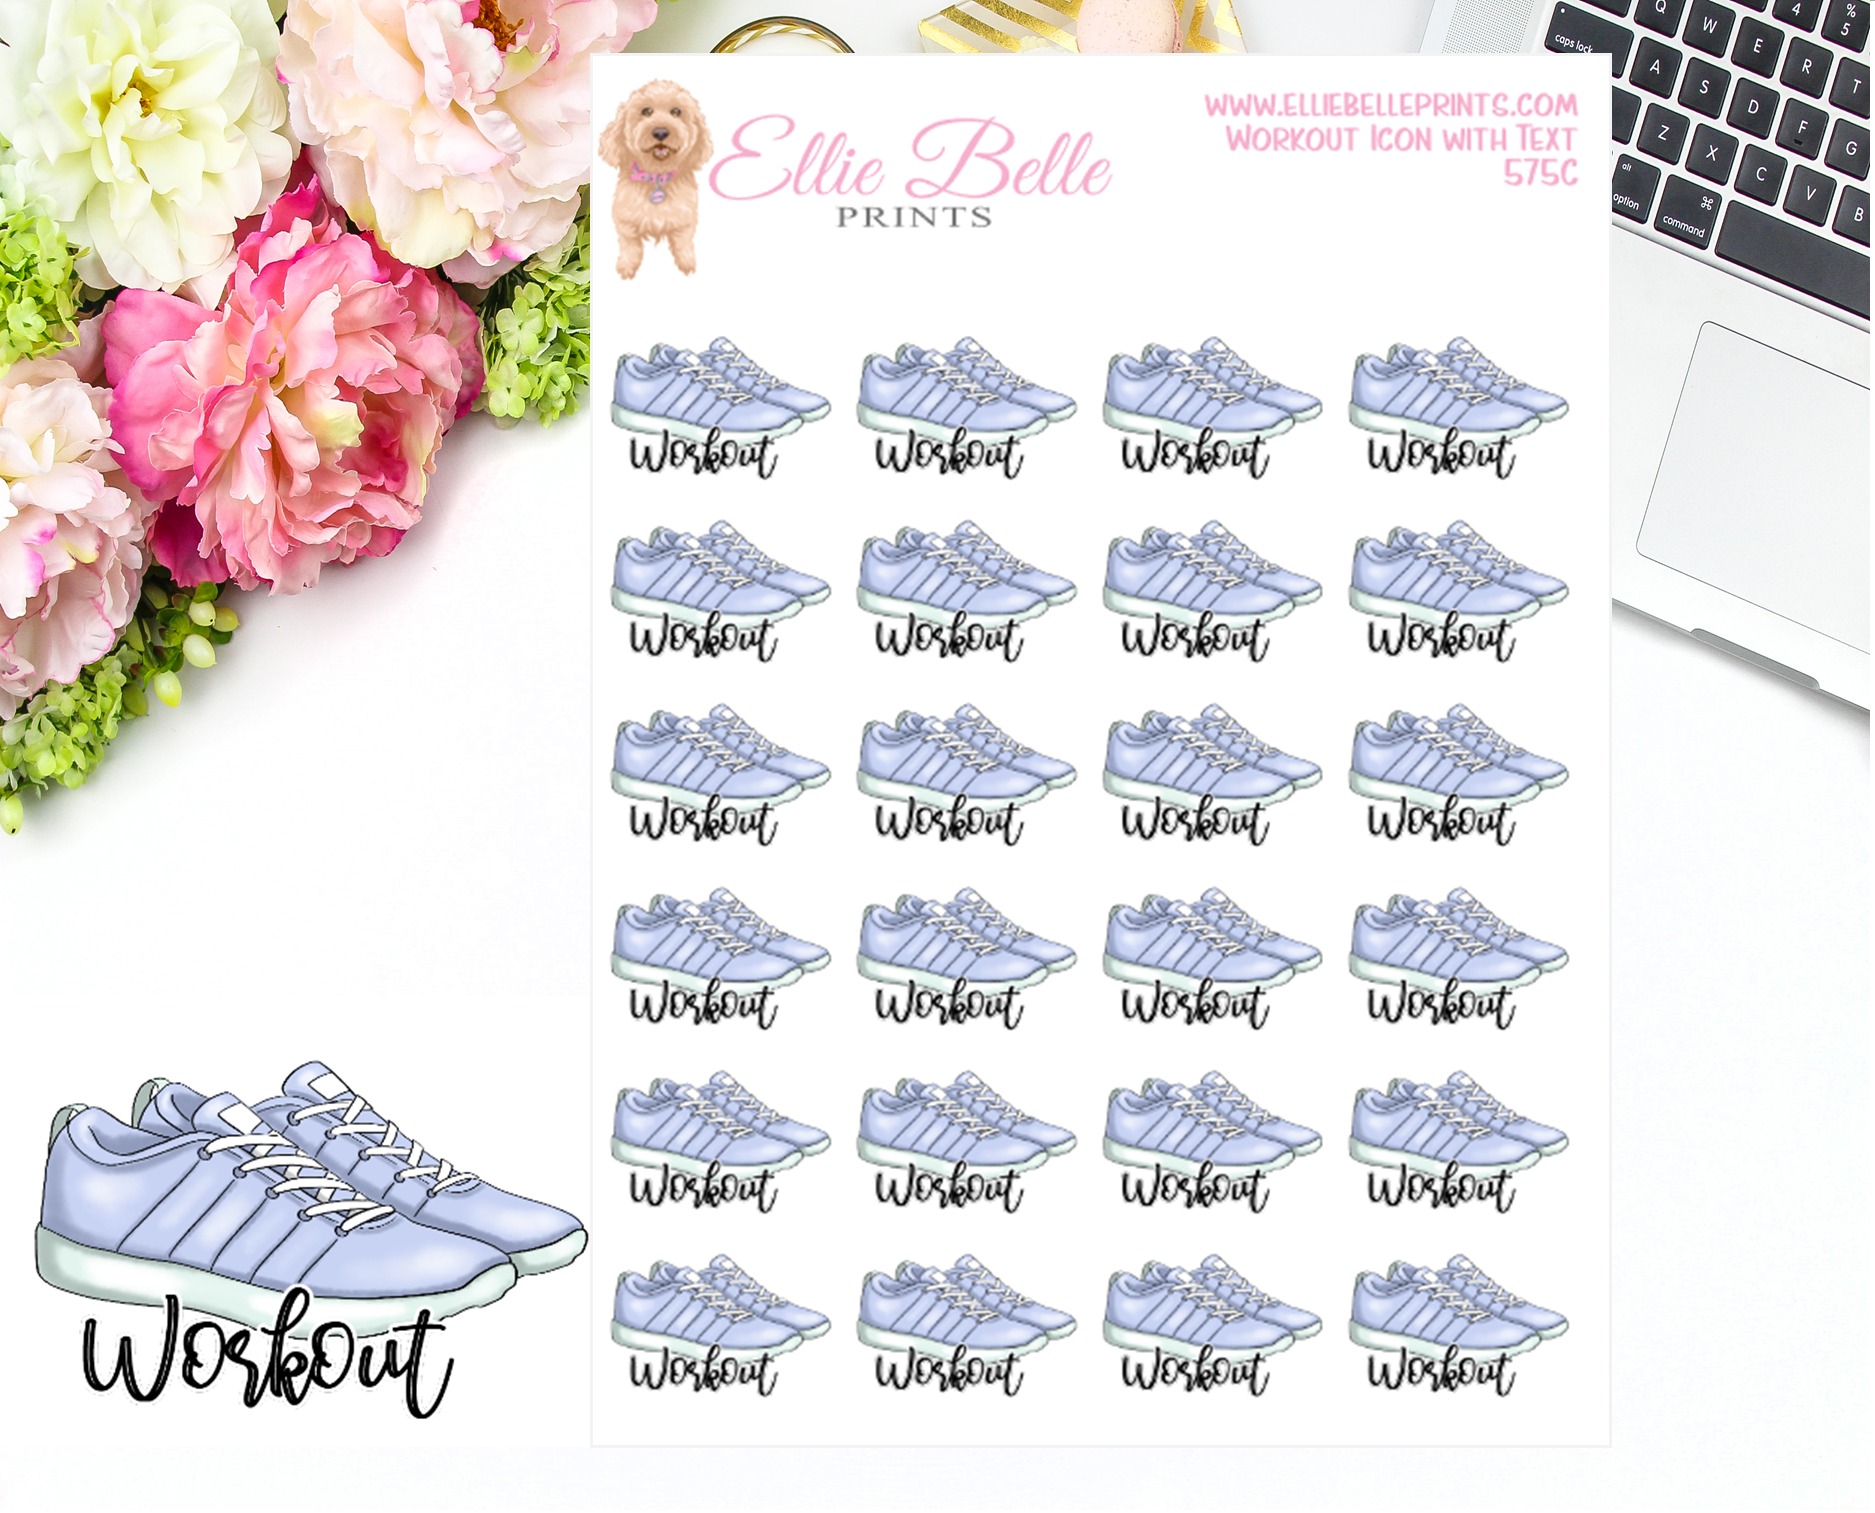 Workout Shoes Icons with Text